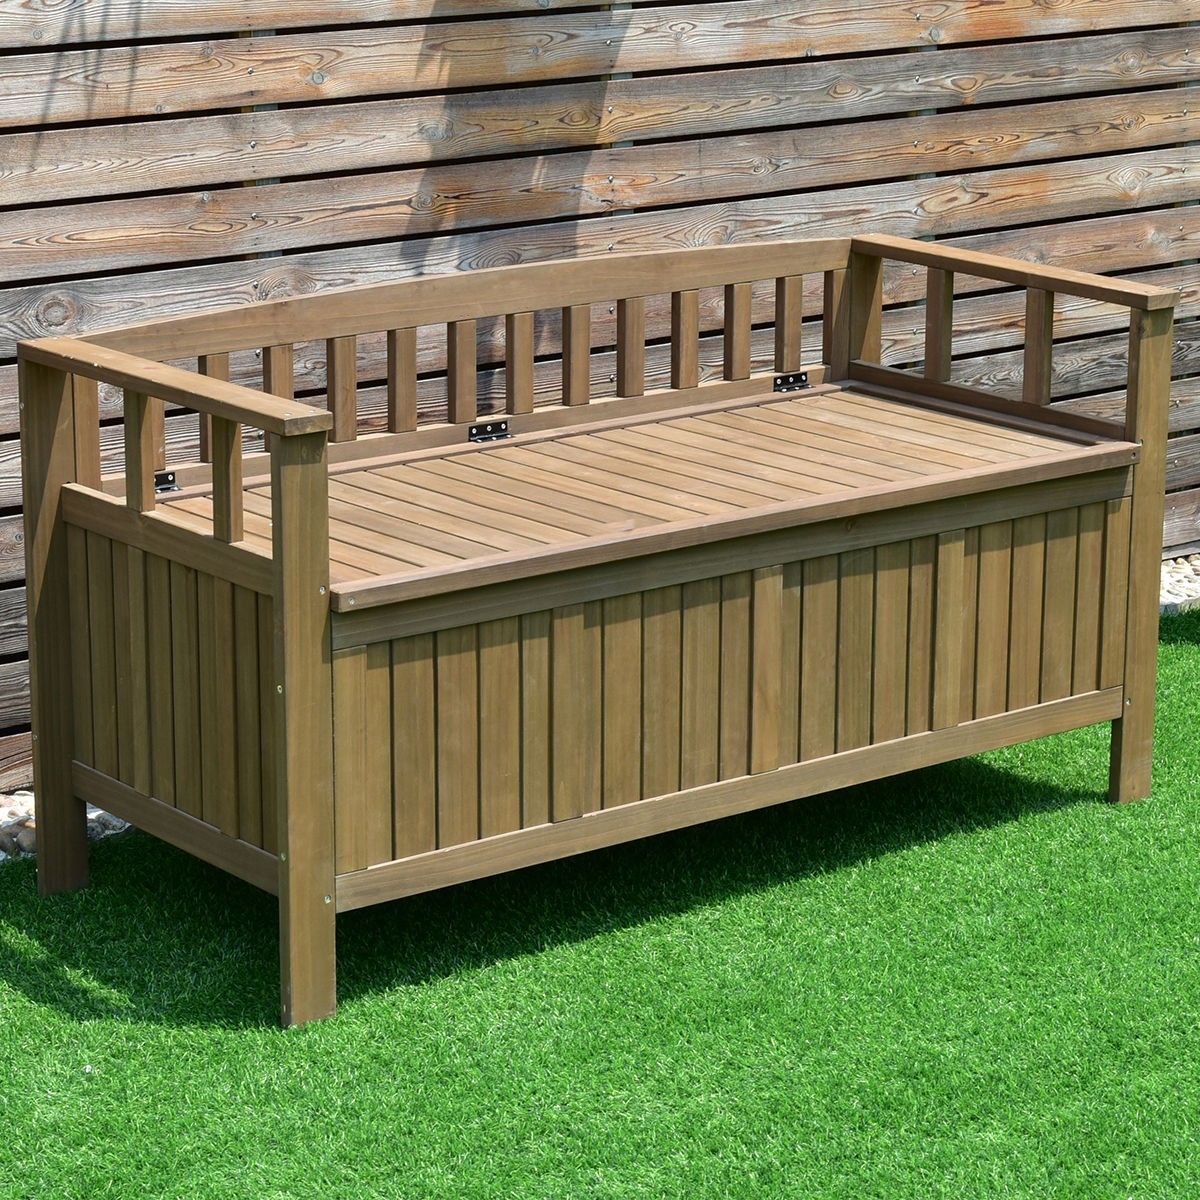 This Outdoor Storage Bench